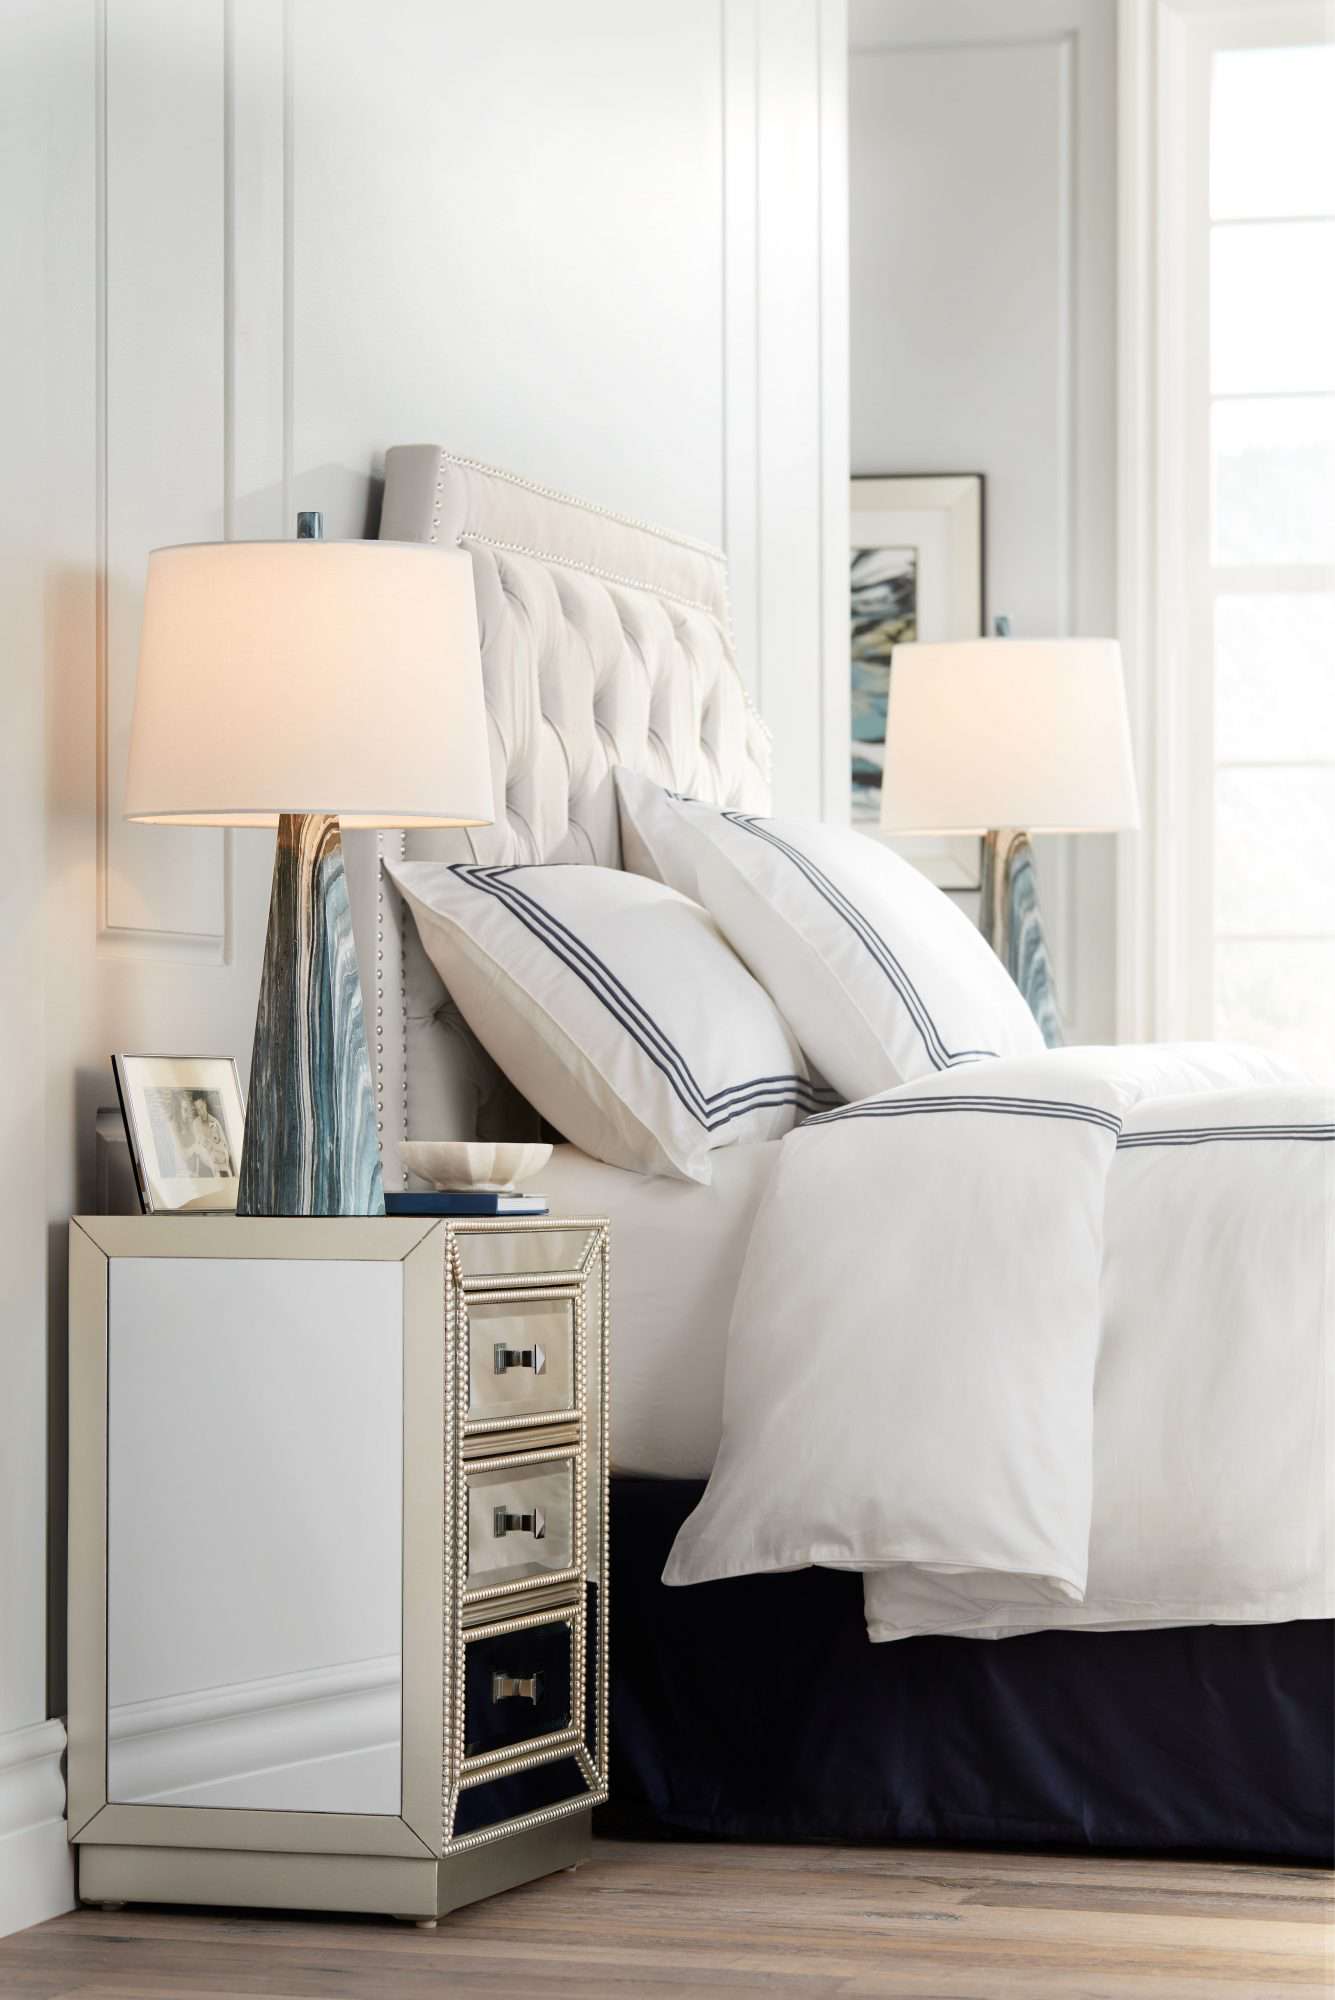 Bed and side tables with lamps in a white and cream palette